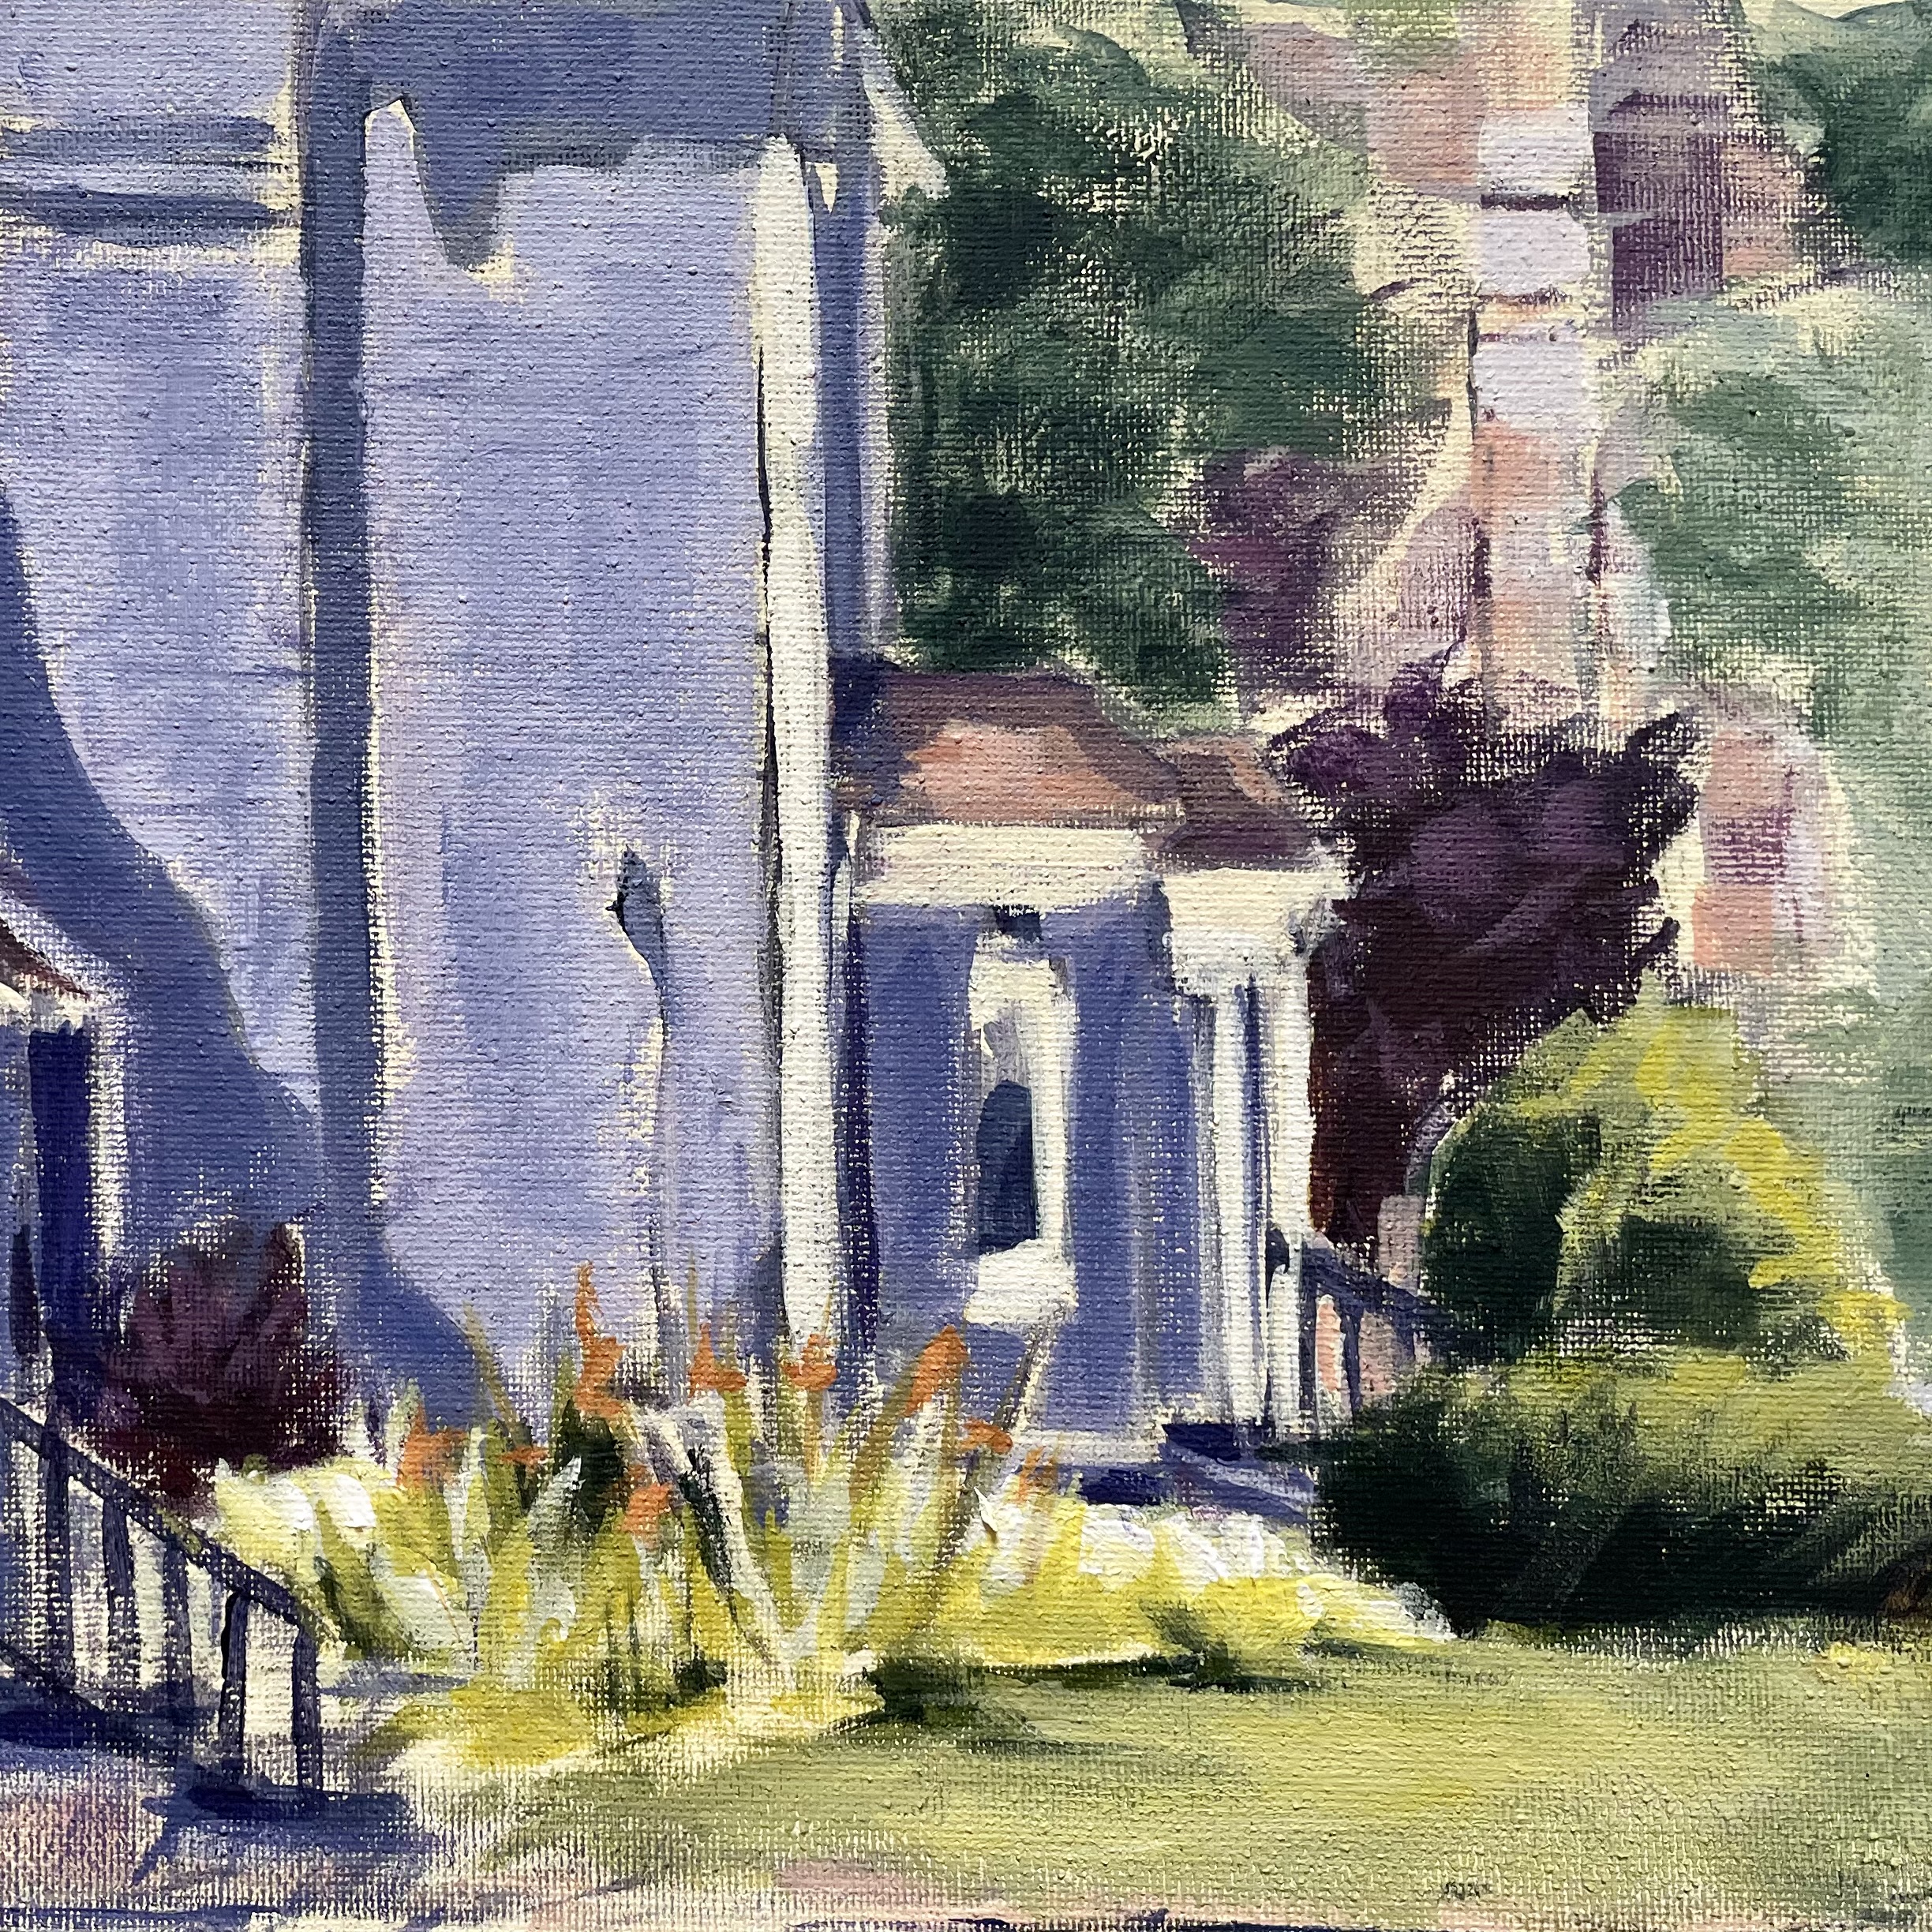 Acrylic painting of a sidelong view of a blue house with green foliage